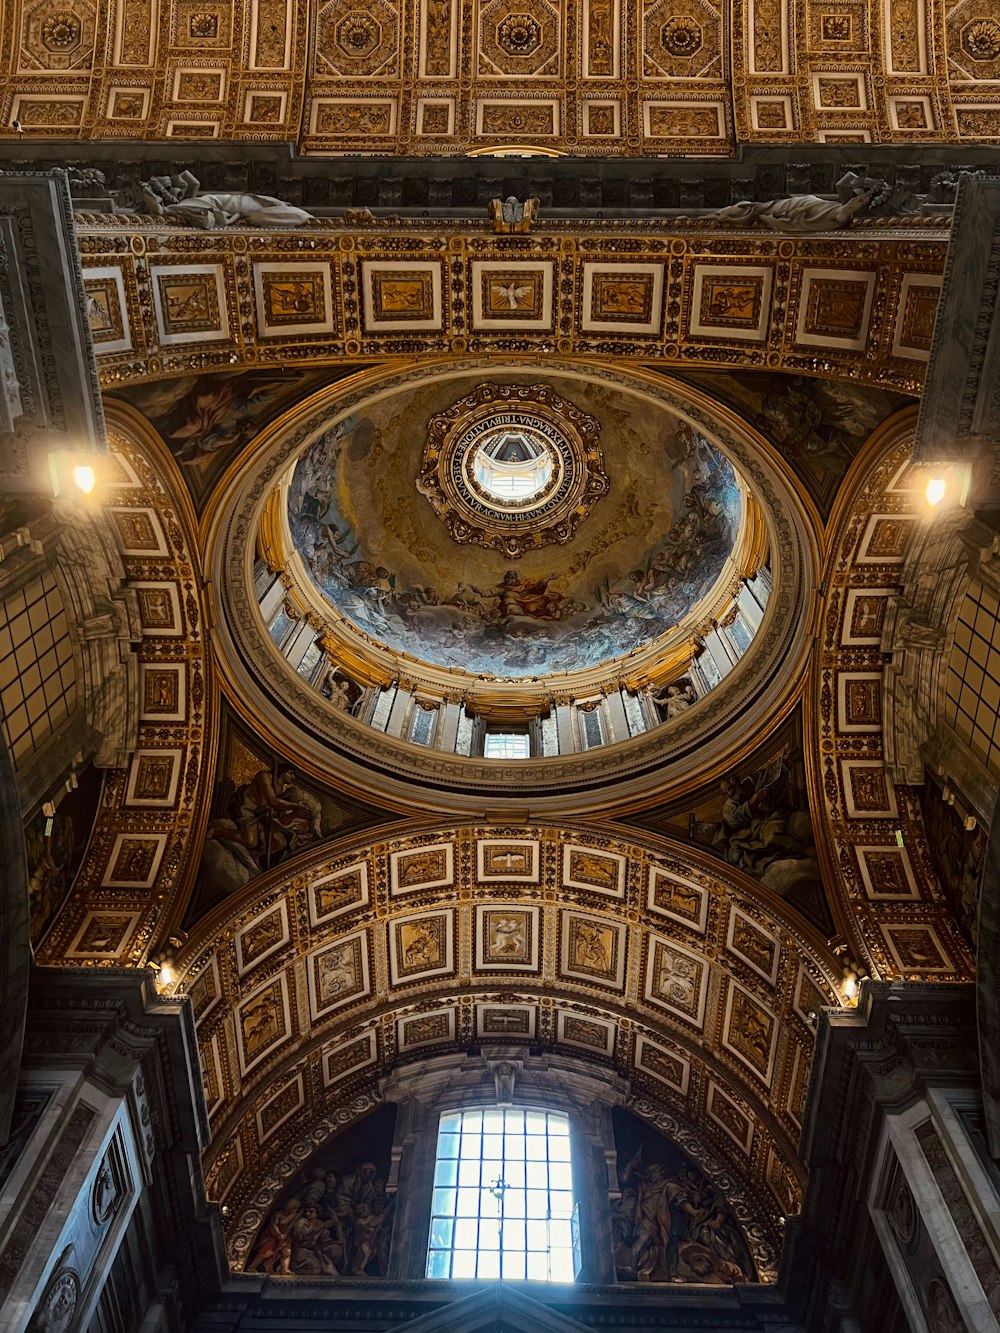 the ceiling of a large building with a dome